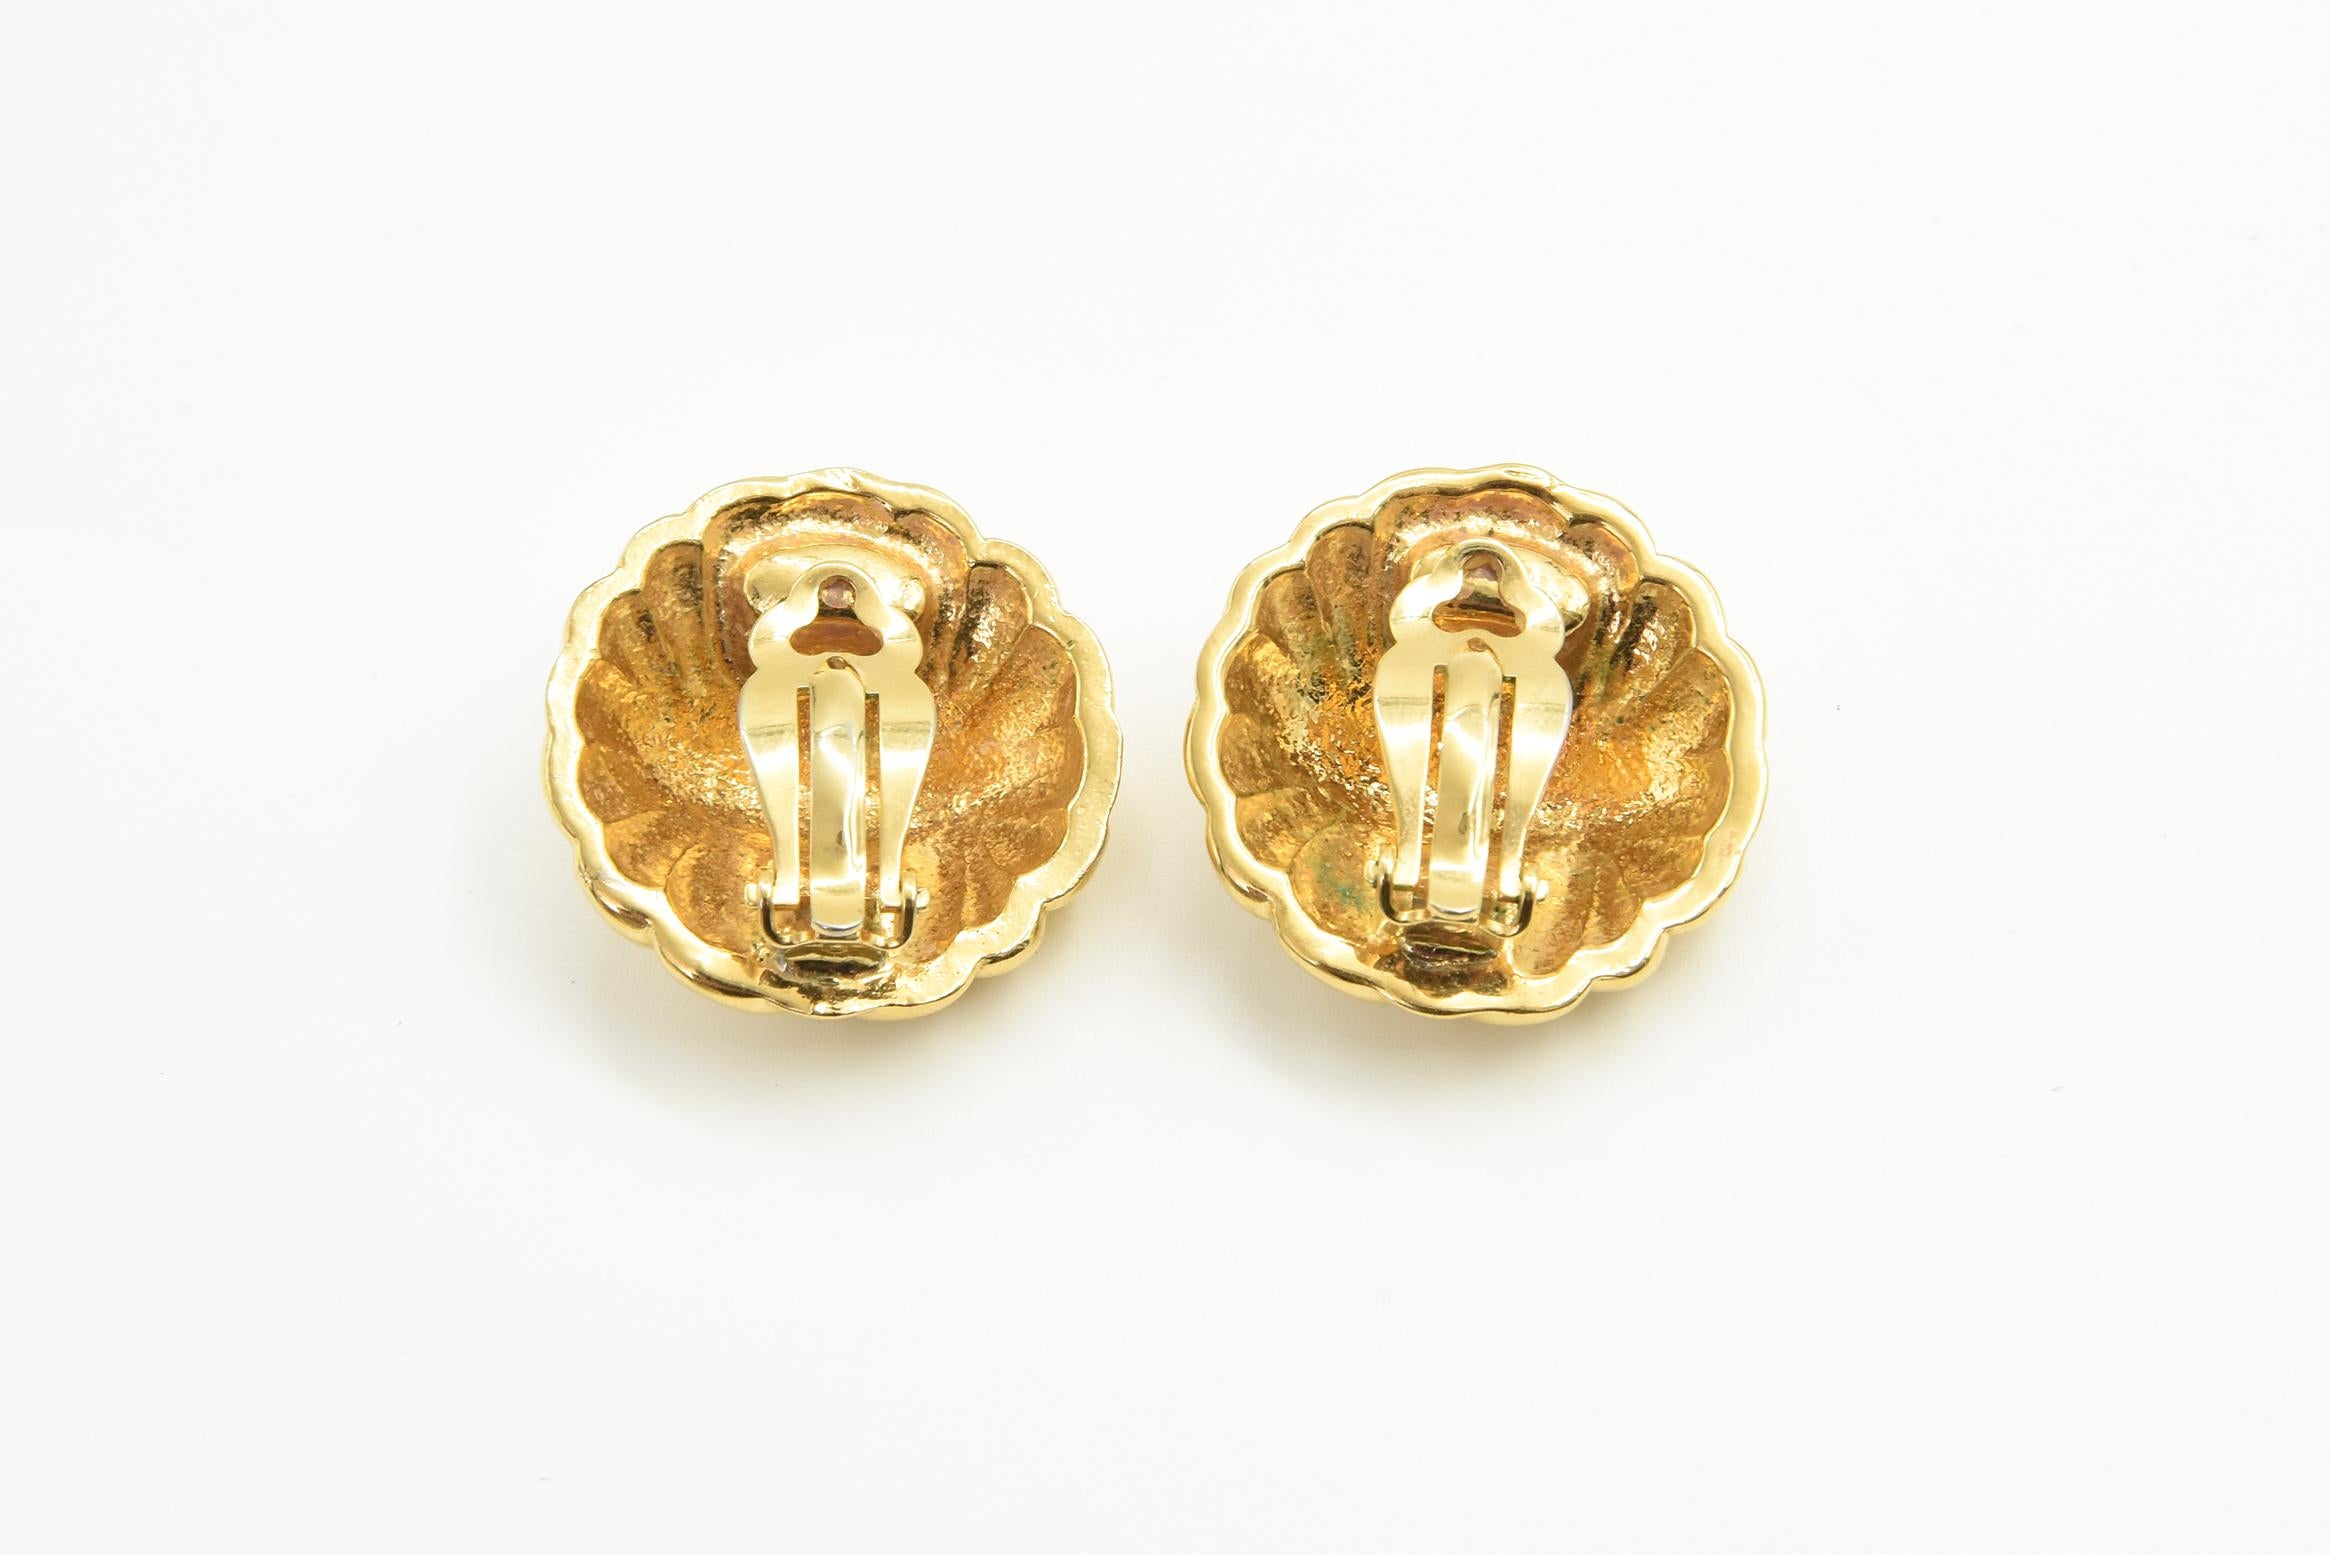 Chanel Style Quilted with Bows Gold Tone Button Clip On Earrings 2